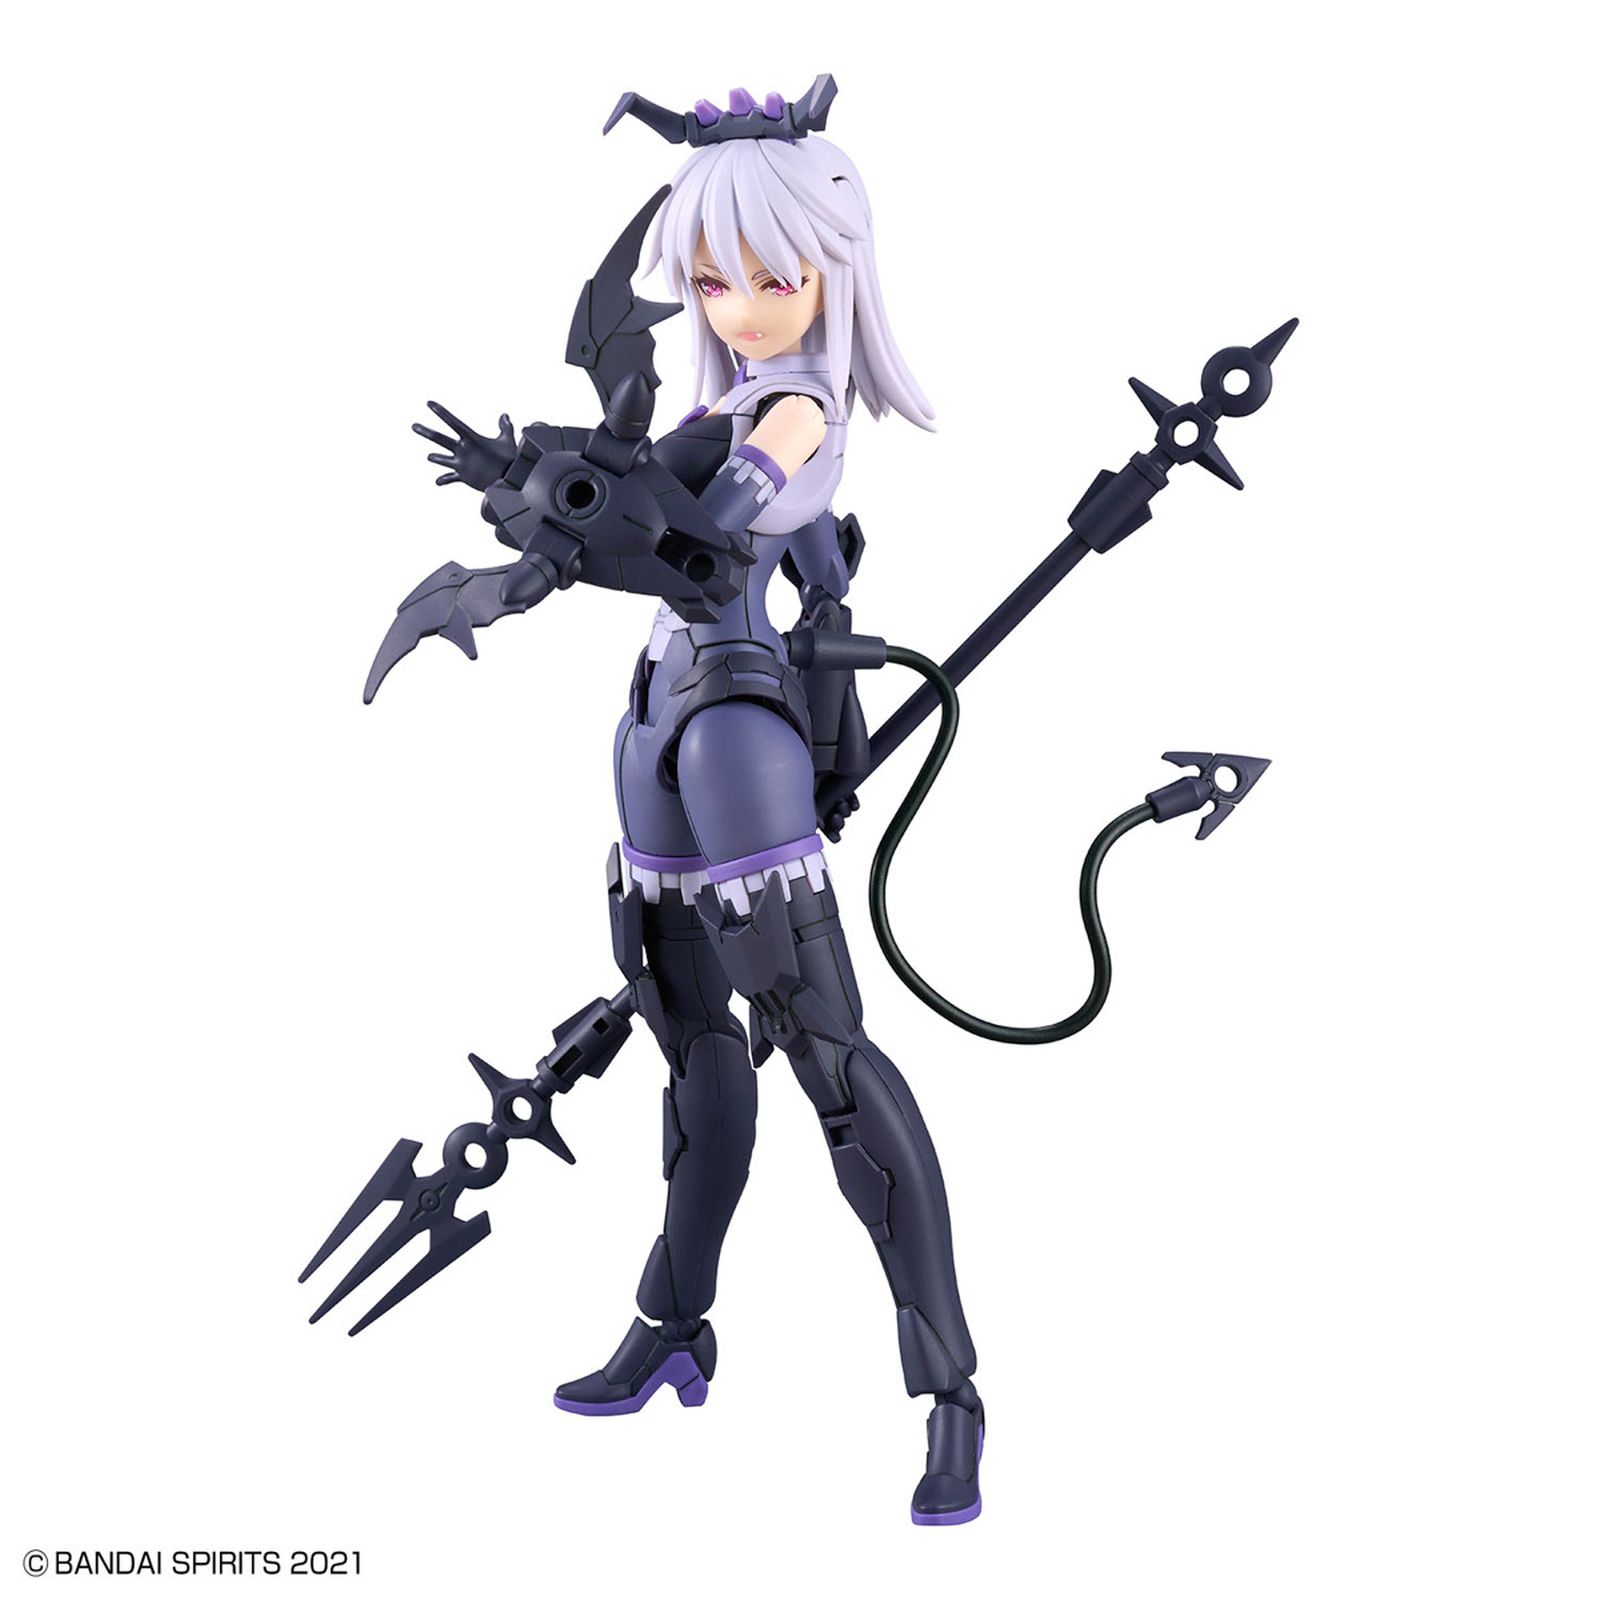 SIS-D00 NEVERLIA [COLOR A] FIG 30 MS